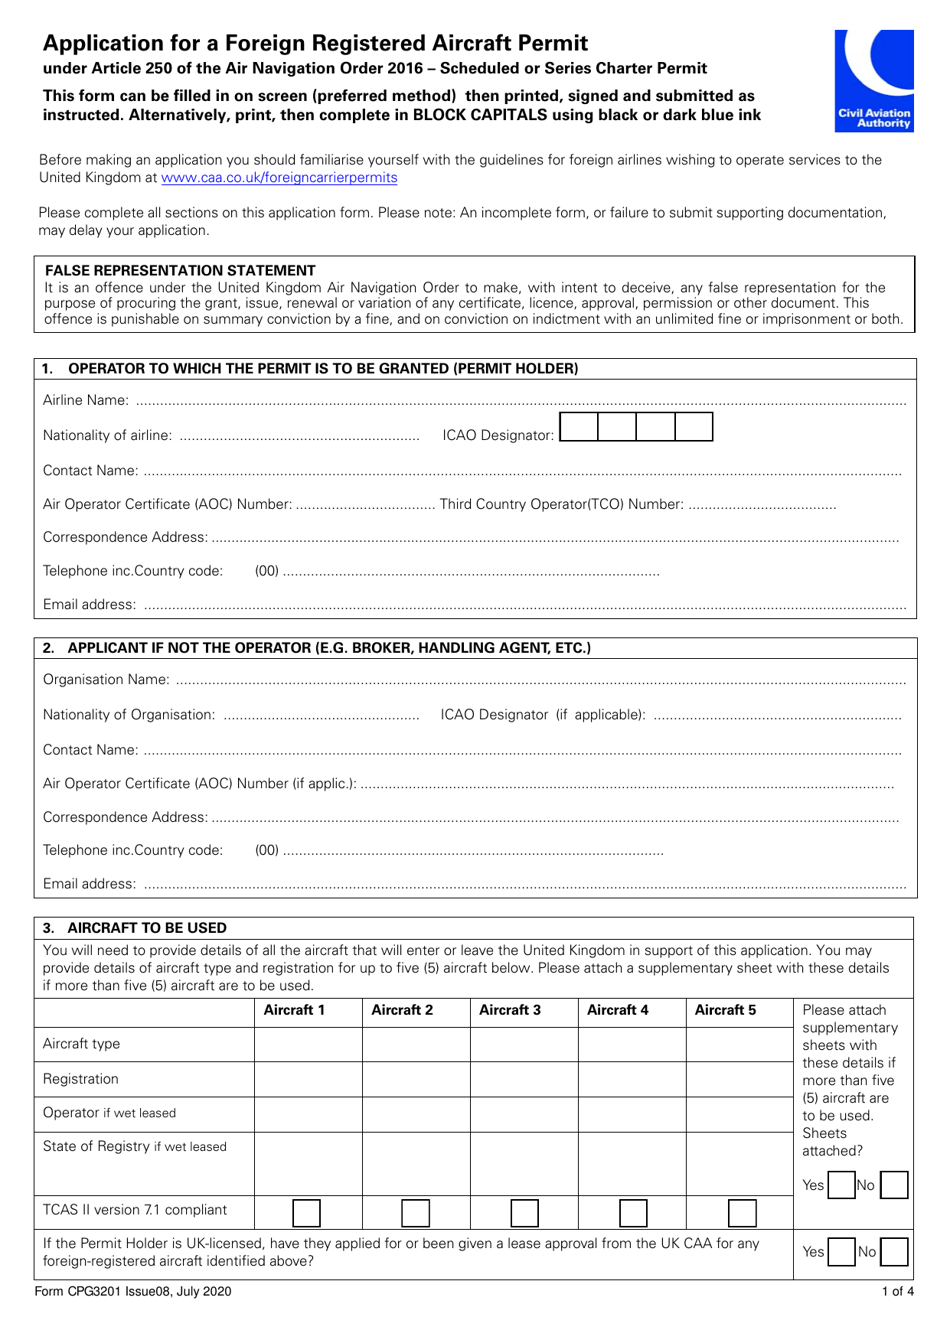 Form CPG3201 Application for a Foreign Registered Aircraft Permit Under Article 250 of the Air Navigation Order 2016 - Scheduled or Series Charter Permit - United Kingdom, Page 1